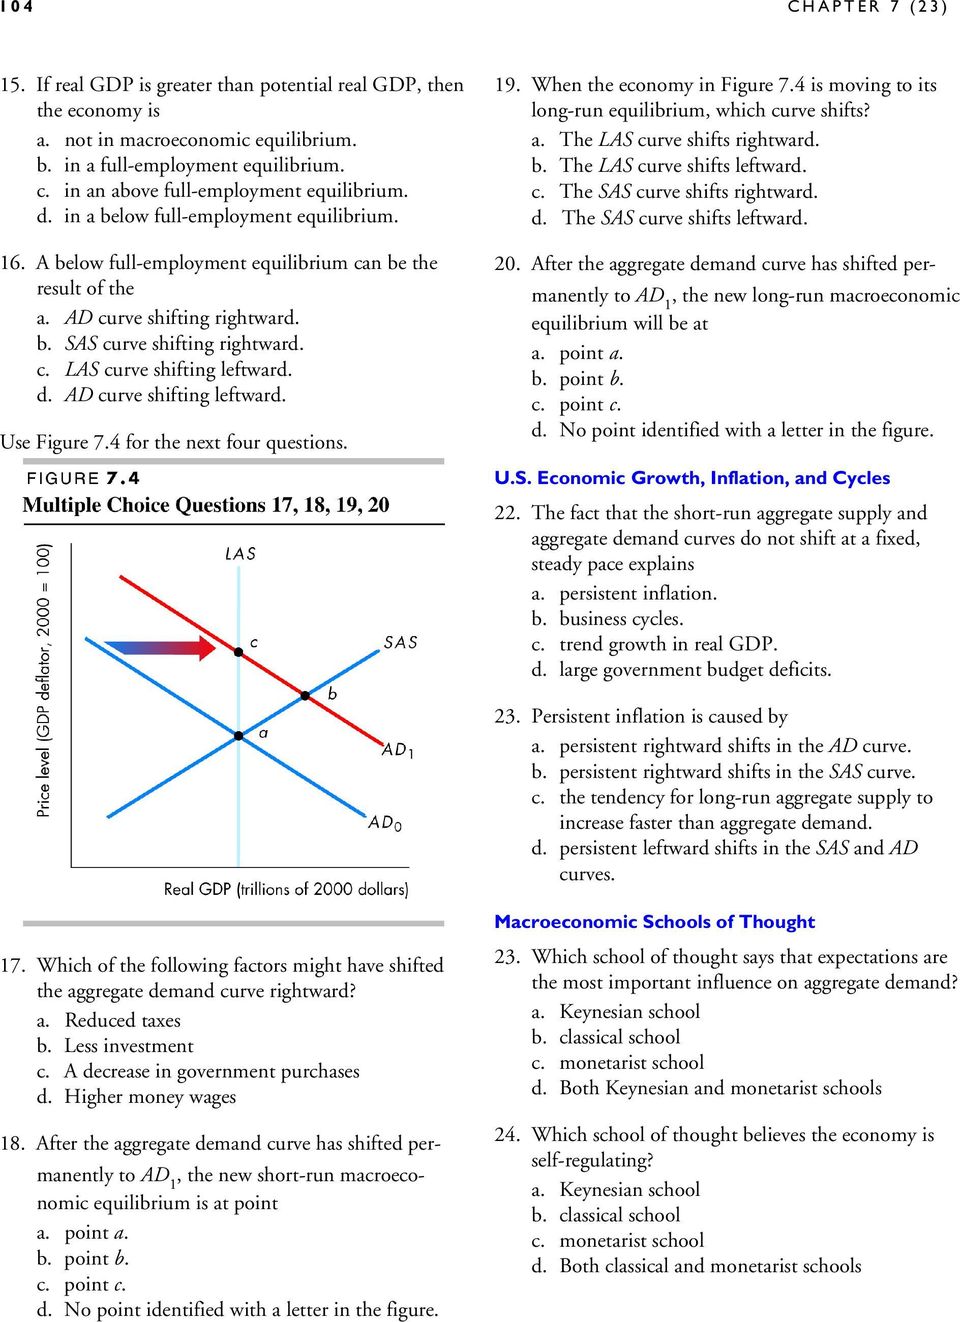 c. LAS curve shifting leftward. d. AD curve shifting leftward. Use Figure 7.4 for the next four questions. 19. When the economy in Figure 7.4 is moving to its long-run equilibrium, which curve shifts?